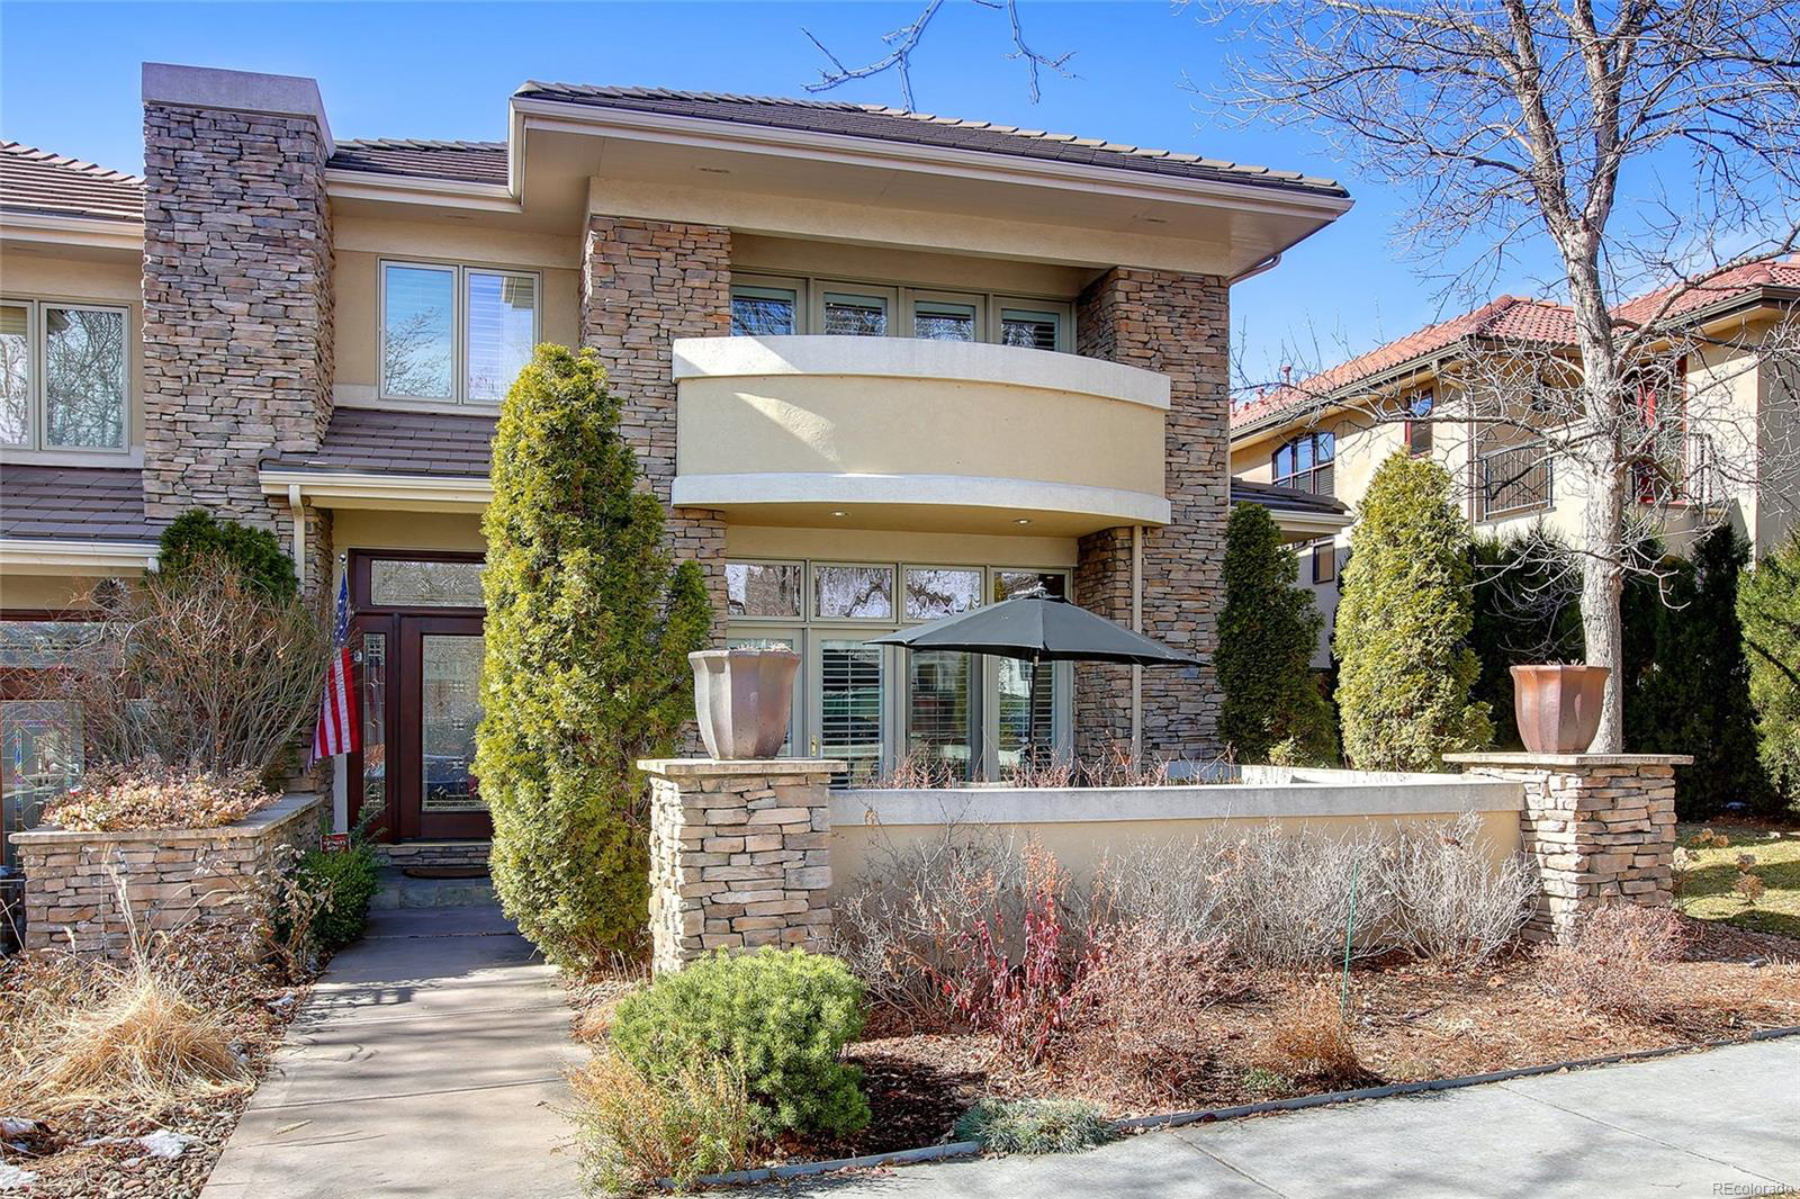 Crush of the week:  Cherry Creek North town home, defying the norm